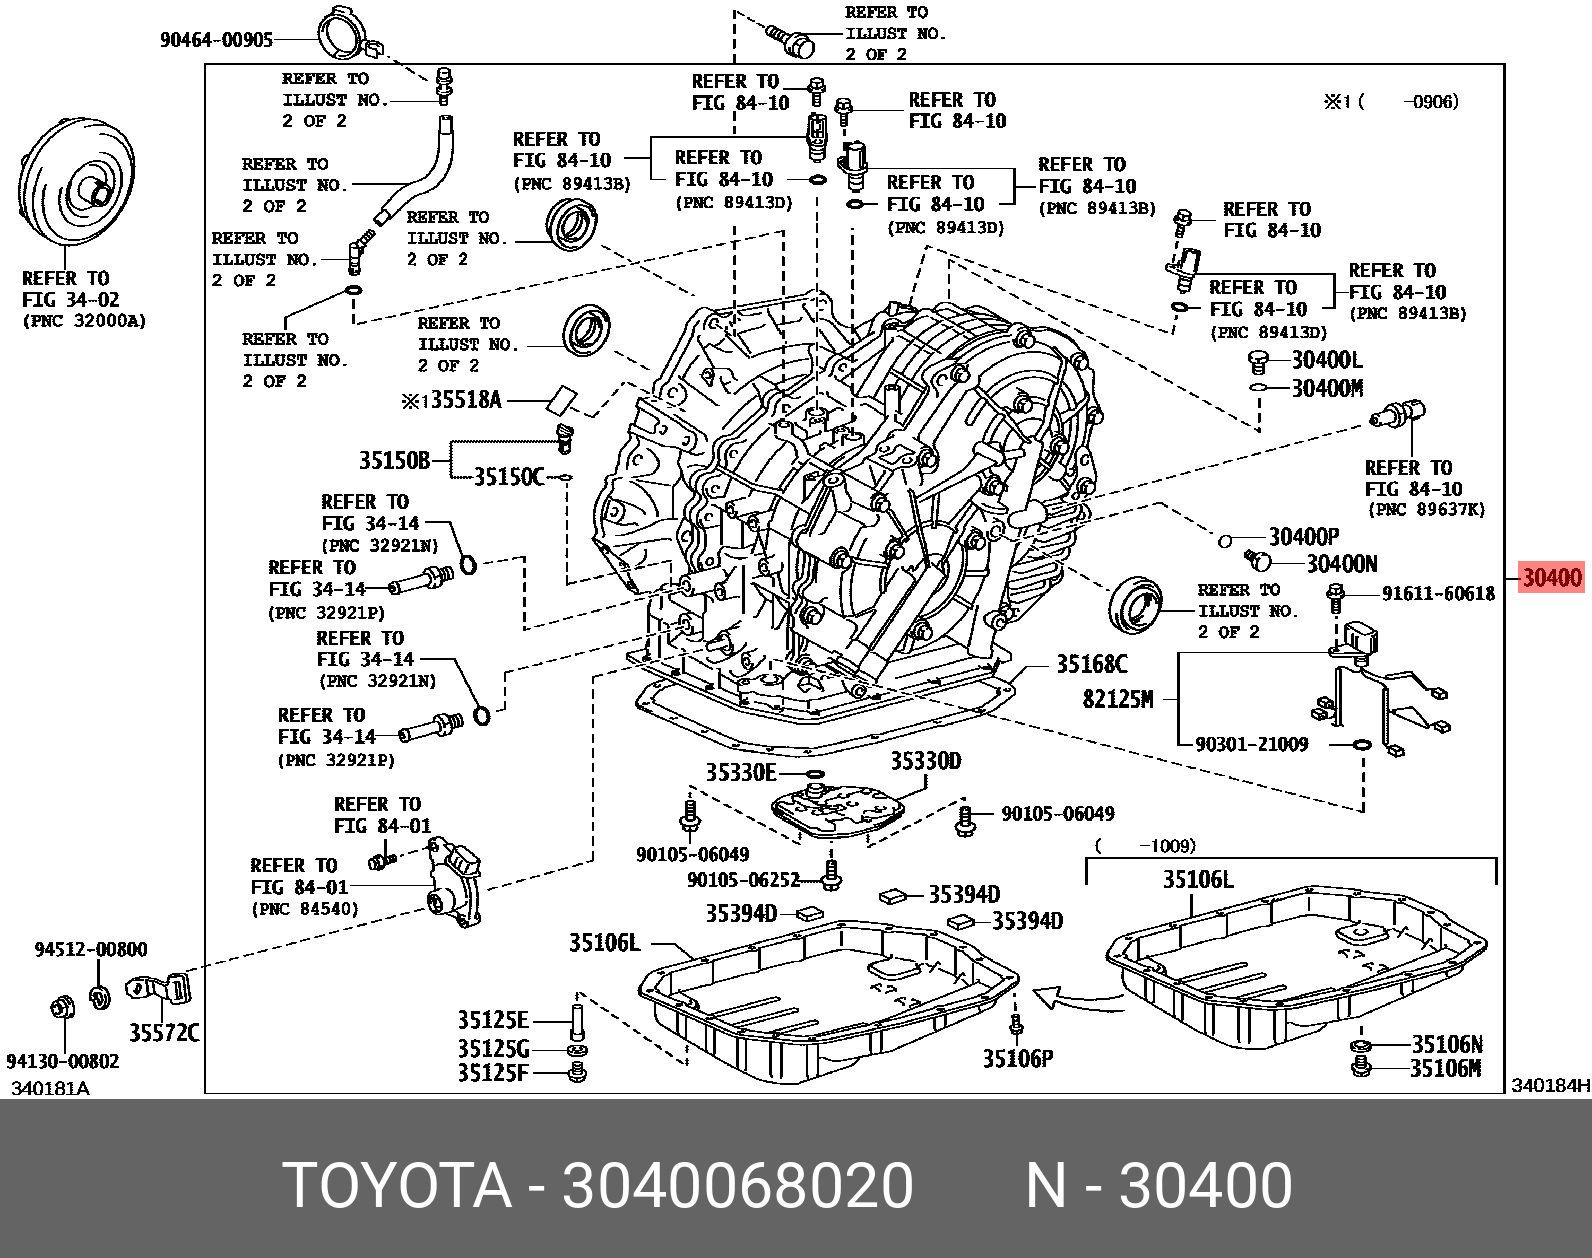 3040068020, WISH 200903-201711, ZGE2#, TRANSAXLE ASSY, CONTINUOUSLY VARIABLE